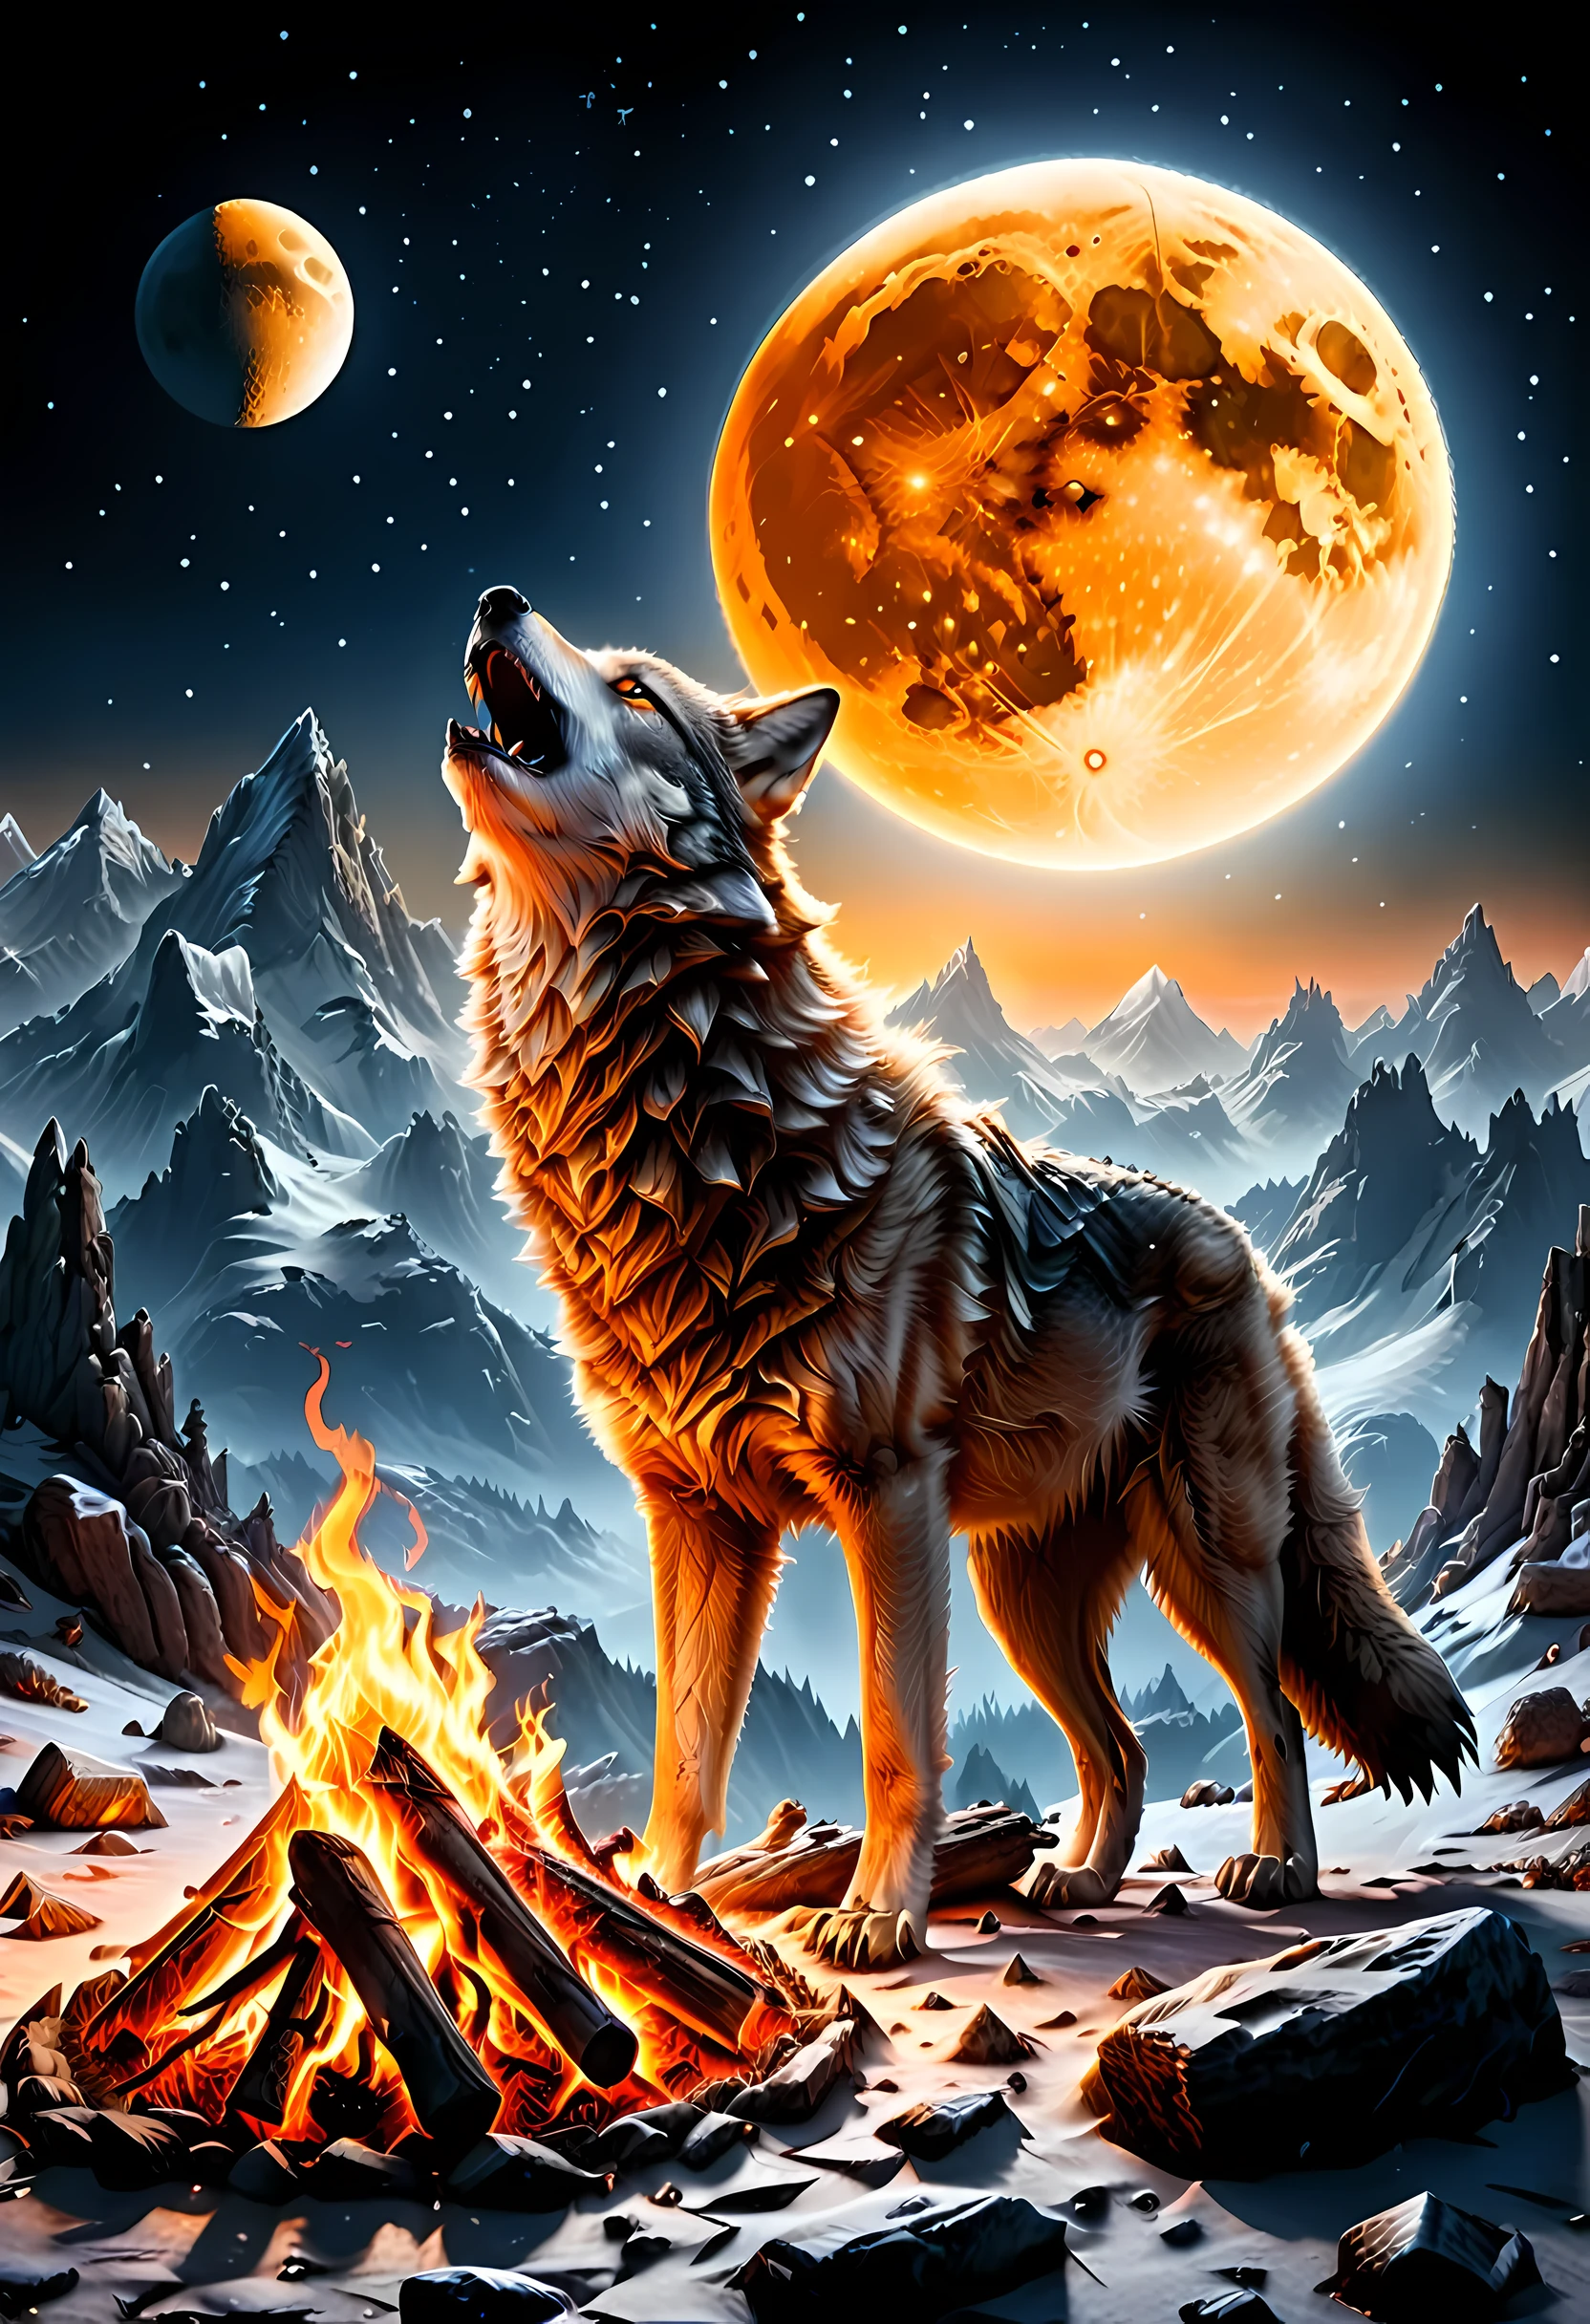 drkfntasy, faize, BJ_Full_Moon a National Geographic style, picture of bonfire at dawn on top of snowy mountain, you can see the moon  and the stars, an image of a wolf howling in the background, high details, best quality, highres, ultra wide angle